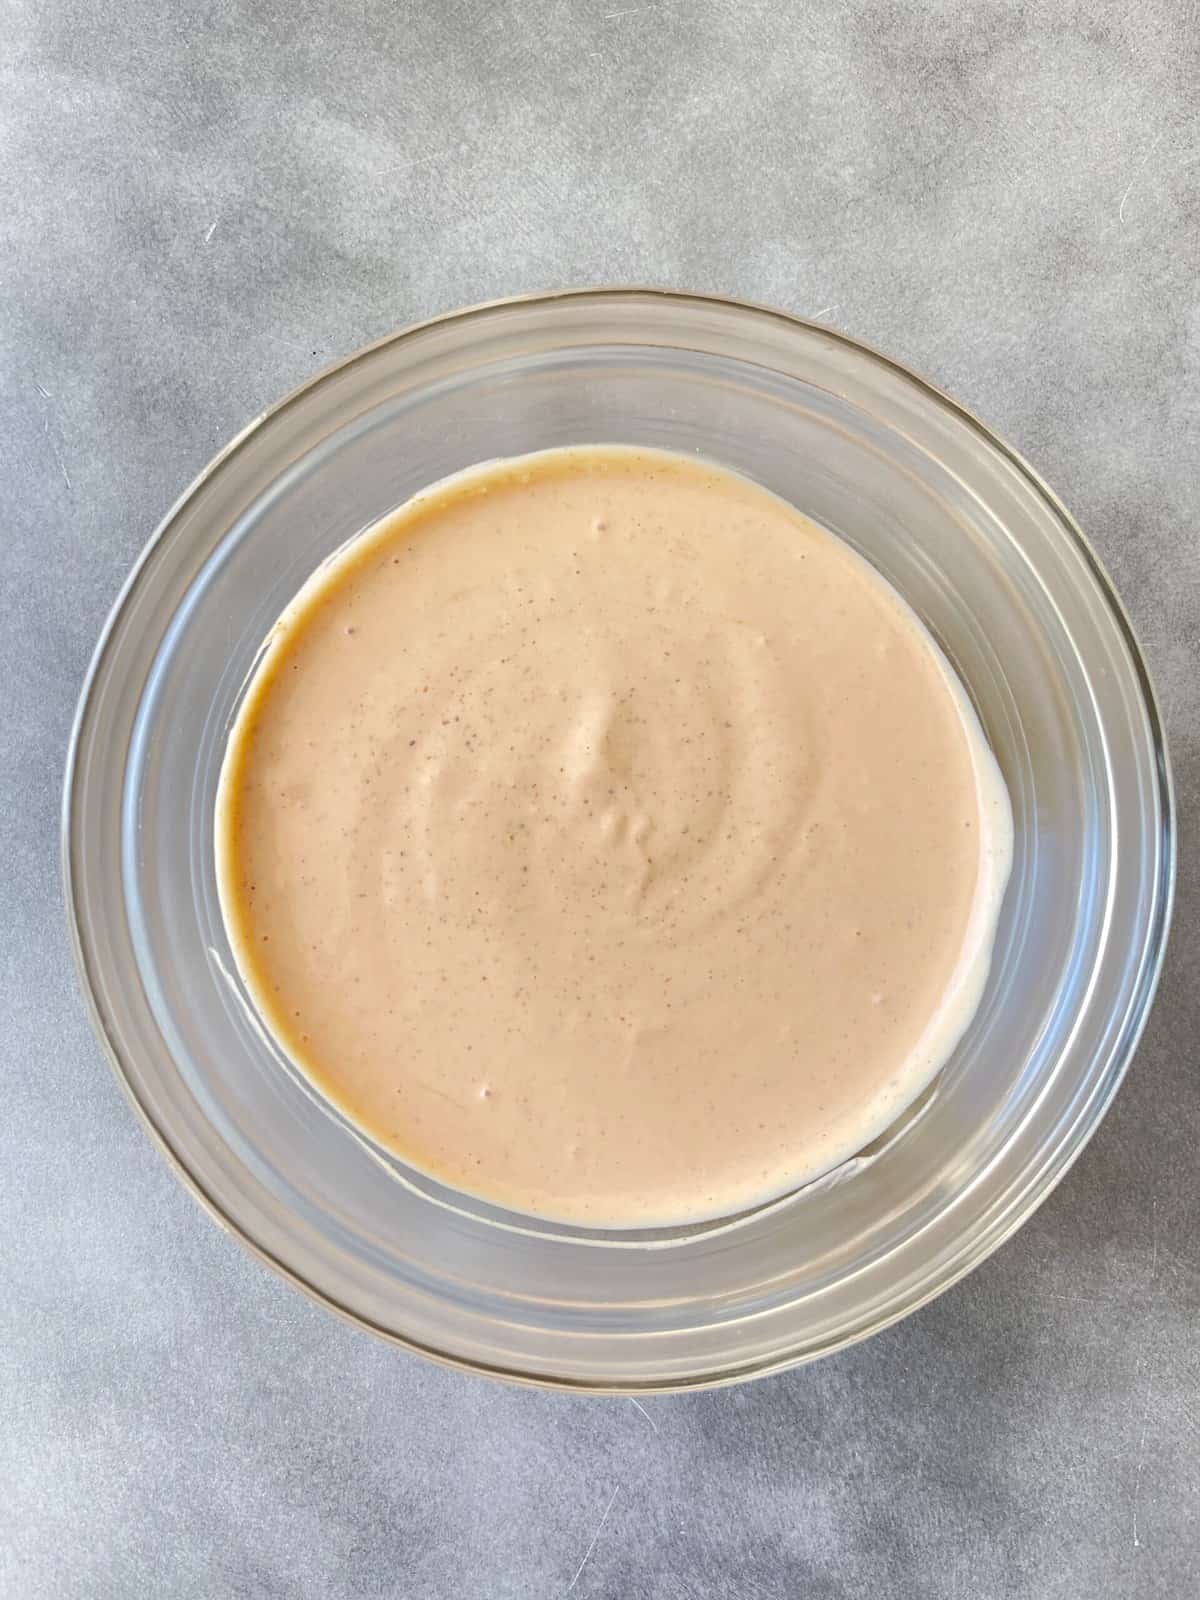 A bowl of homemade burger sauce on a concrete background